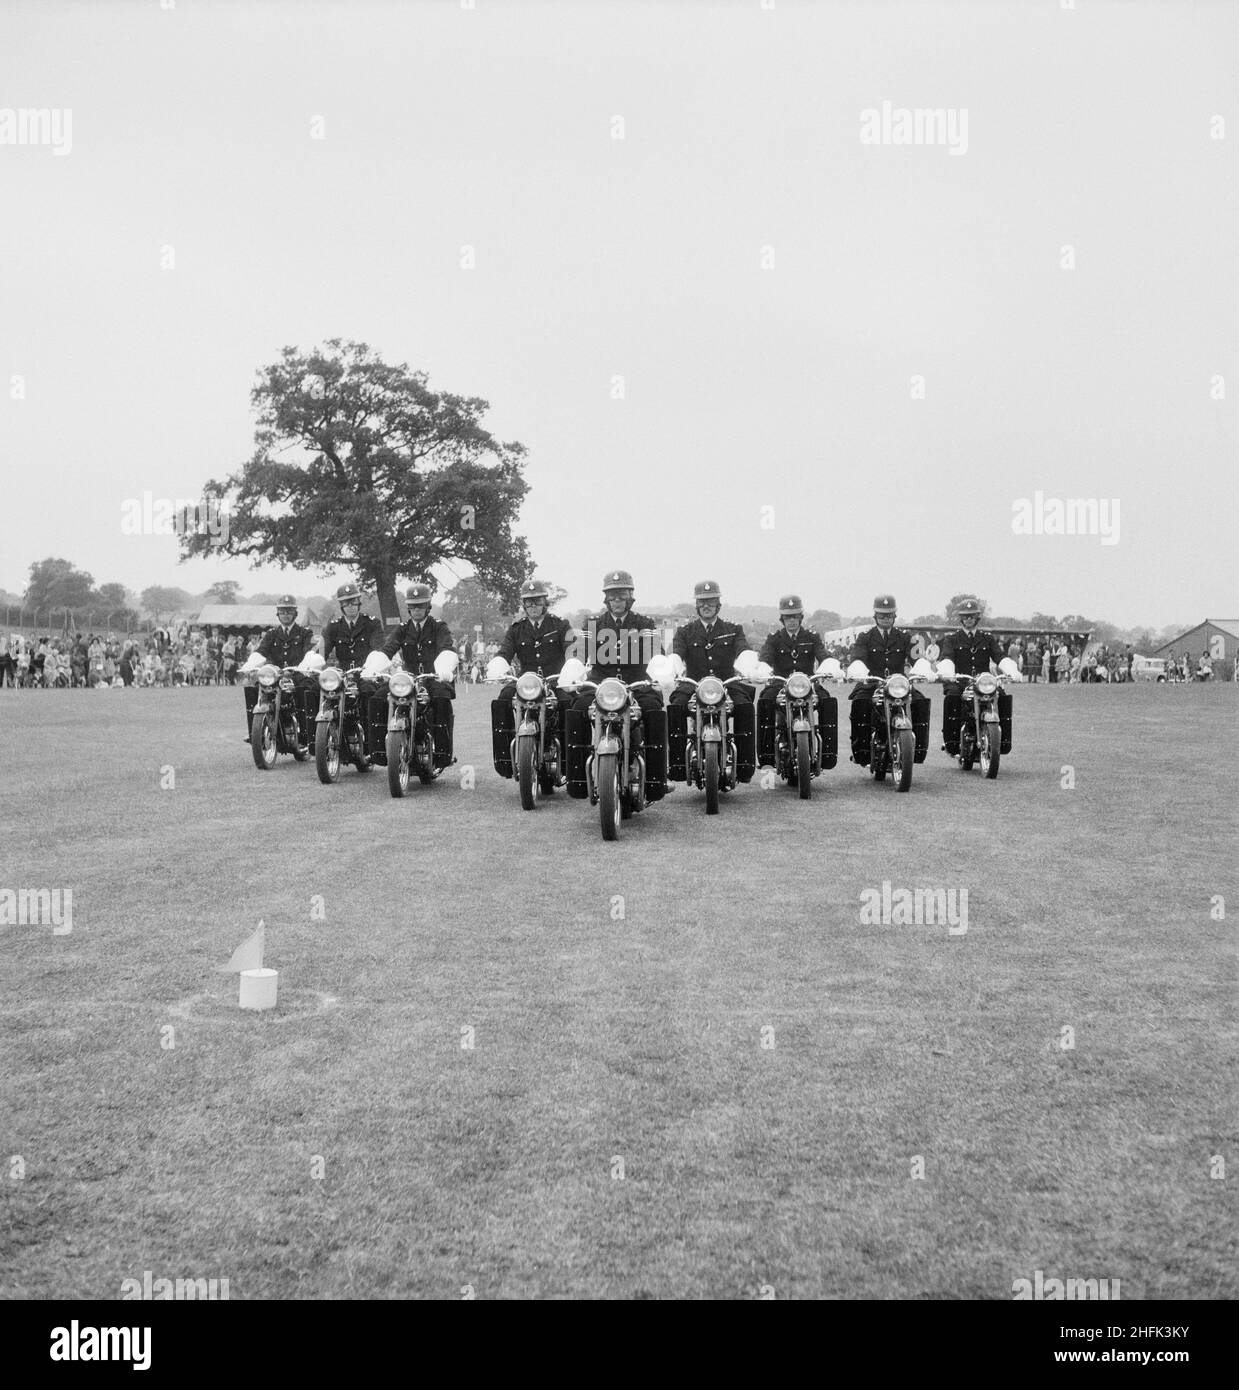 Laing Sports Ground, Rowley Lane, Elstree, Barnet, London, 17/06/1961. The Metropolitan Police Motorcycle Precision Ride Team putting on a demonstration at a Laing sports day at Elstree. This image was published in July 1961 in Laing's monthly newsletter 'Team Spirit'. Stock Photo